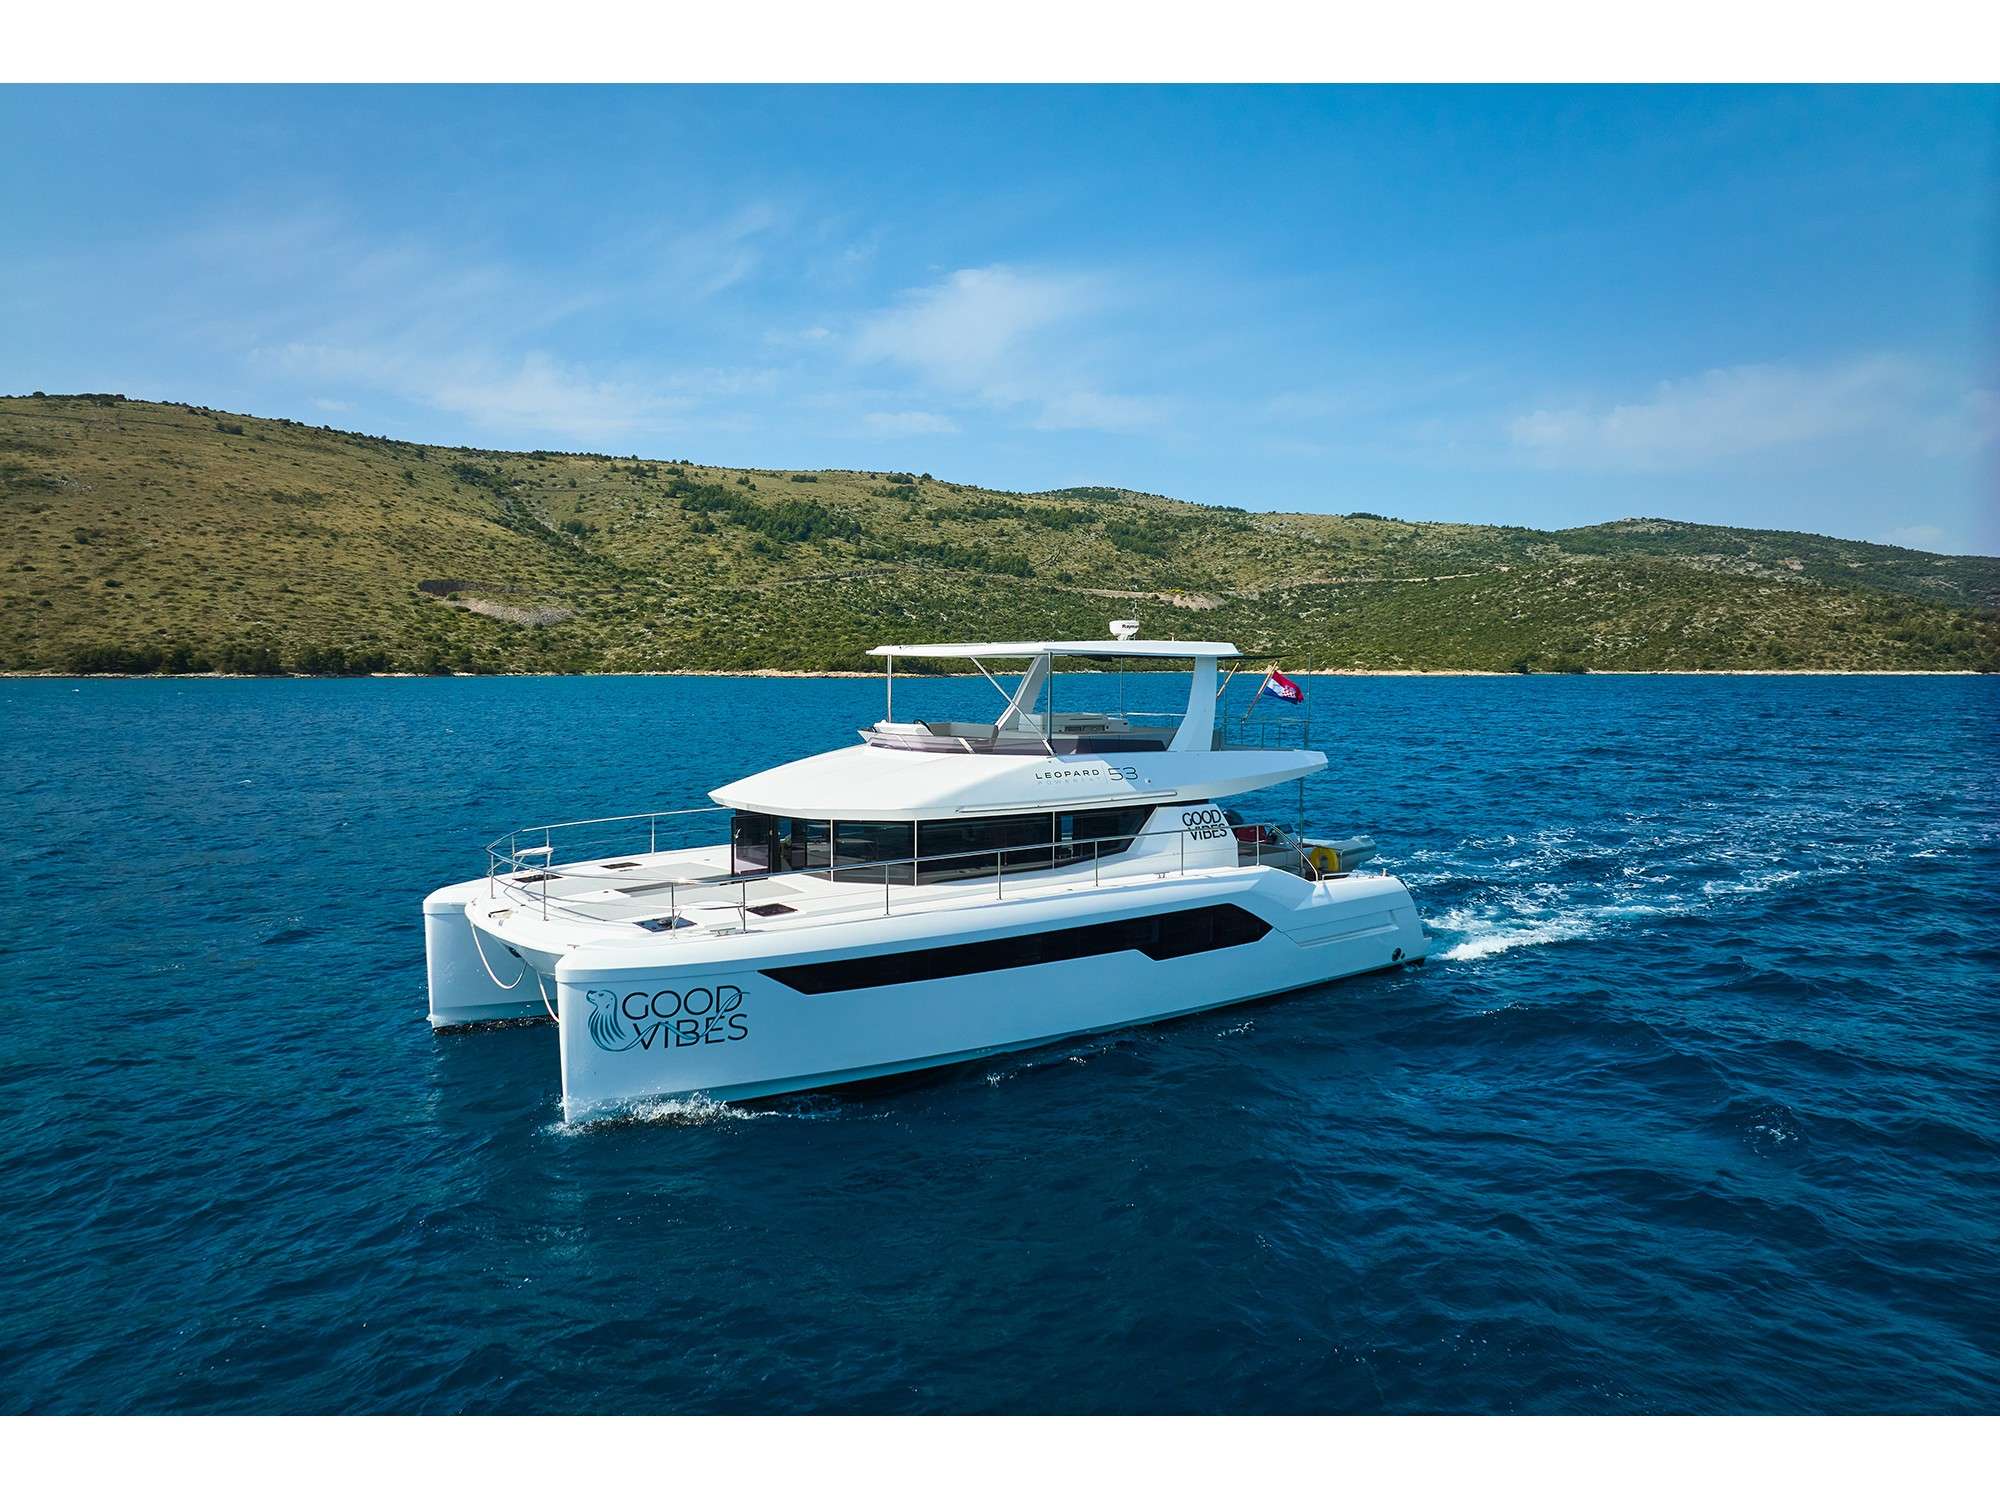 GOOD VIBES ( Leopard 53 PC owner version) Yacht Charter - Ritzy Charters